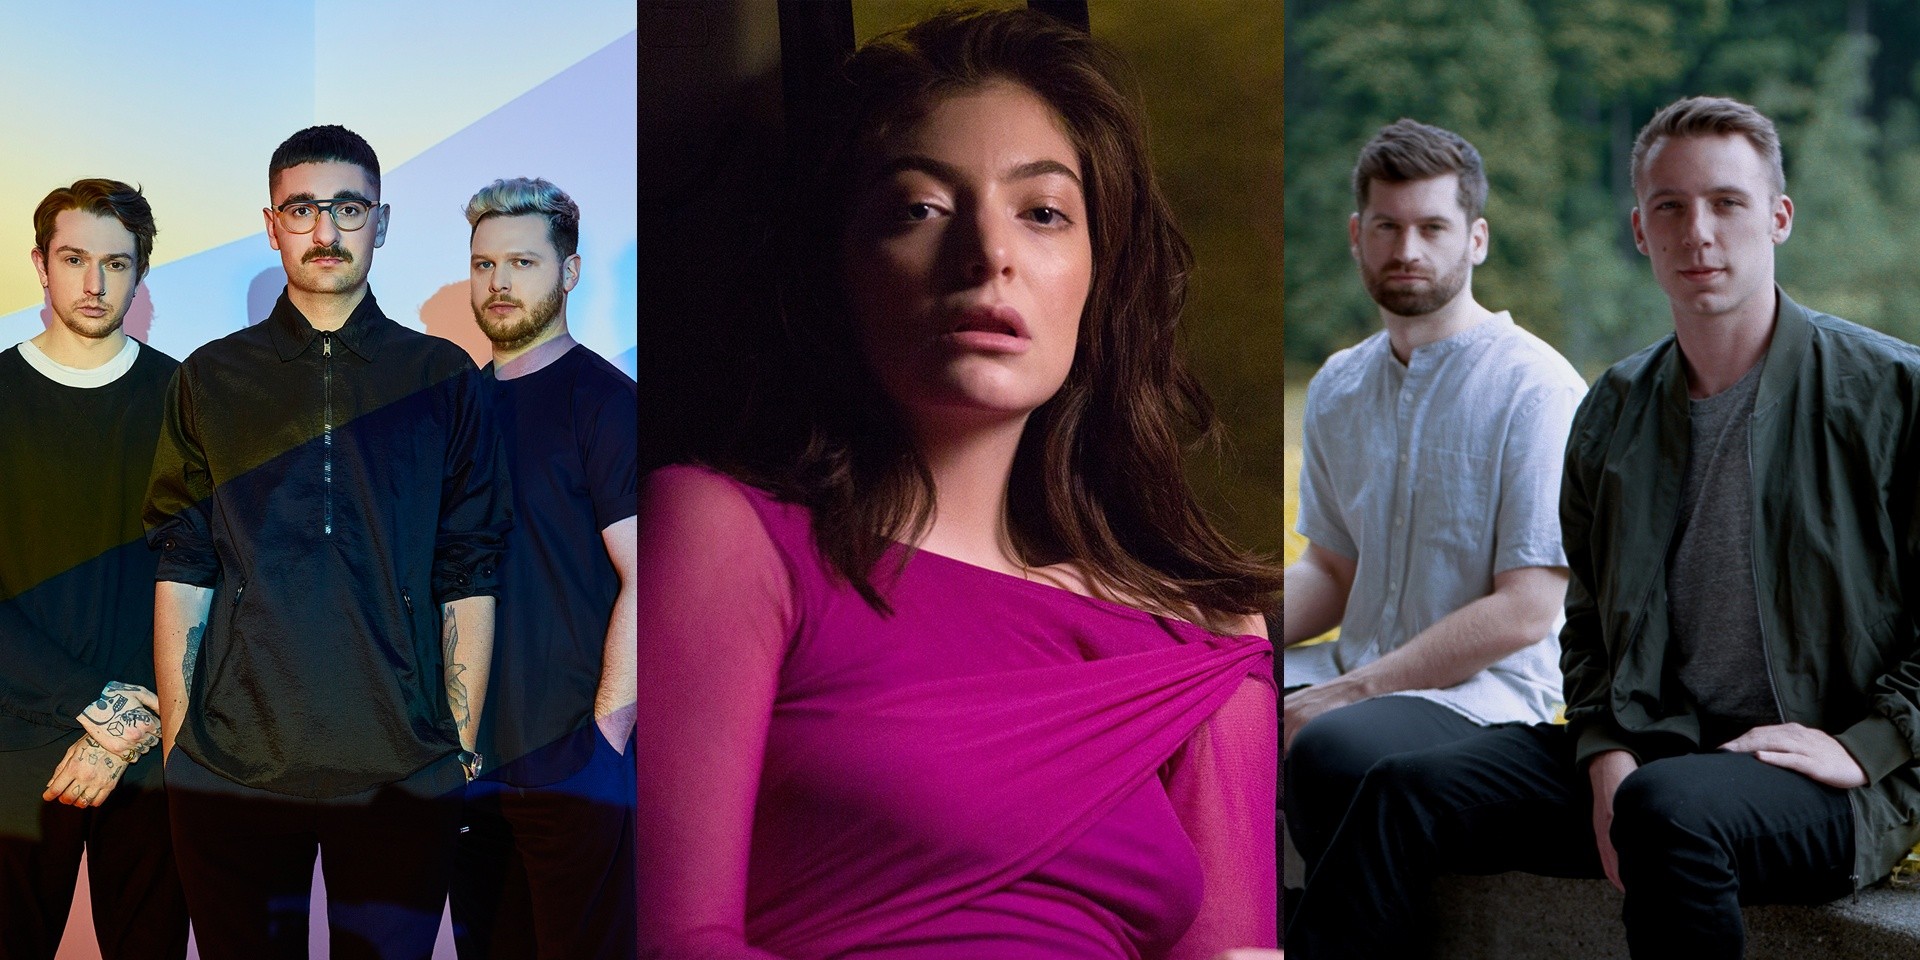 Lorde, alt-J and Odesza lead the international acts in We The Fest's phase 1 line-up announcement